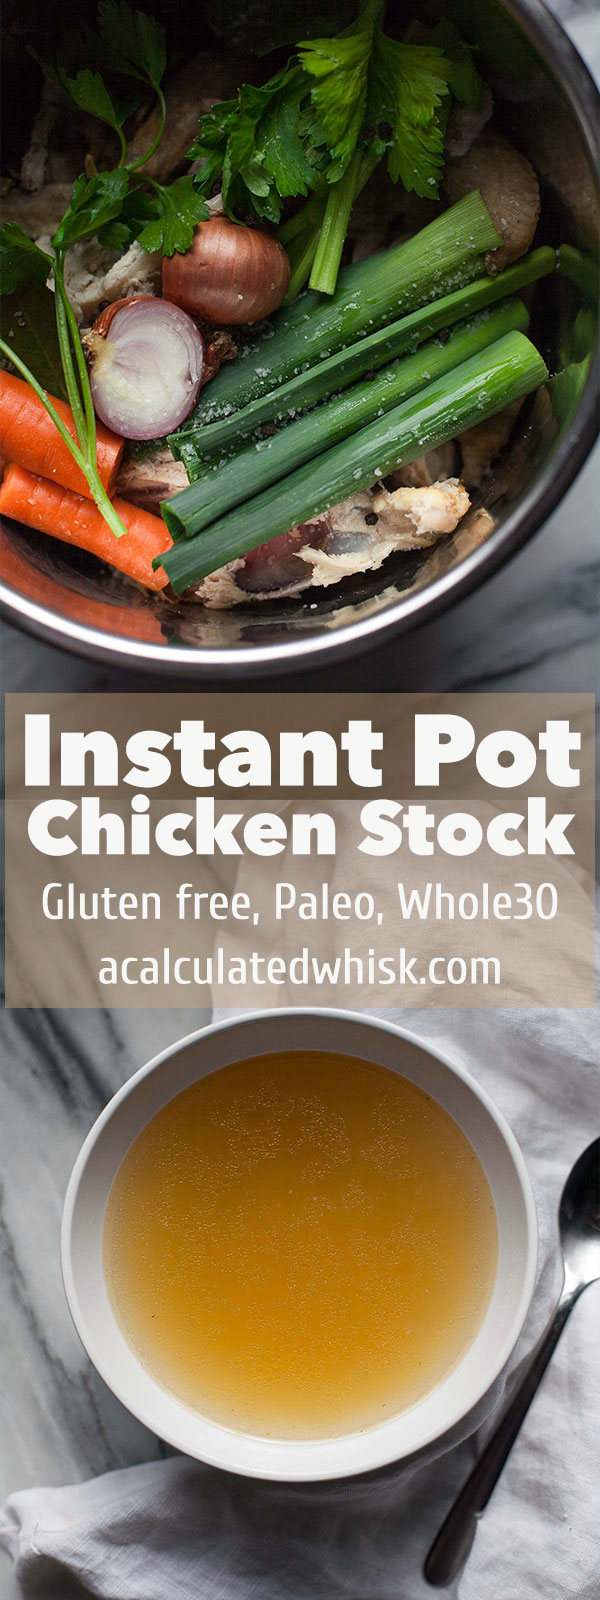 Instant Pot Chicken Stock (Paleo, Whole30) | acalculatedwhisk.com